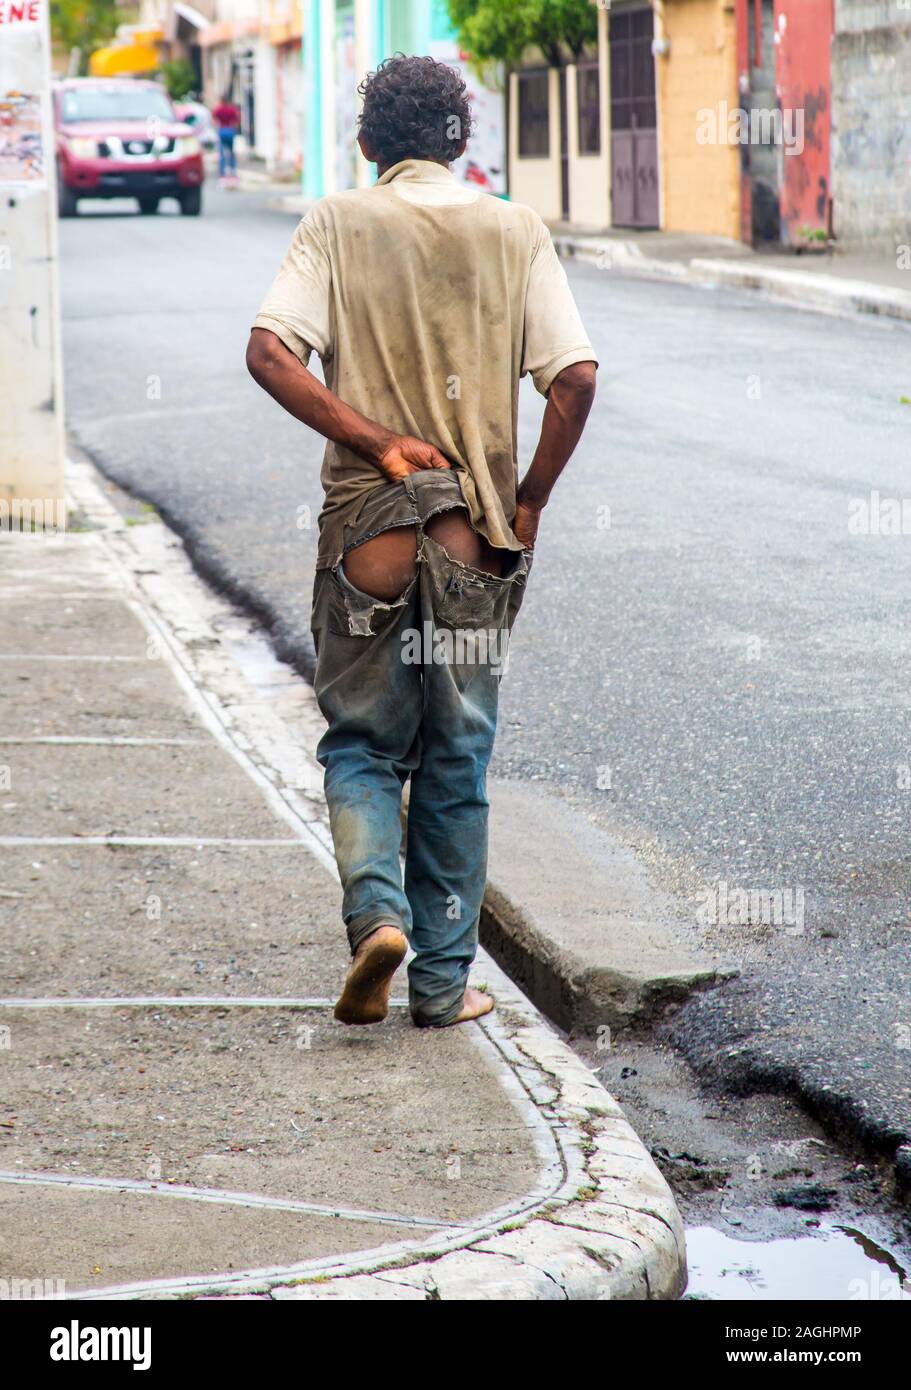 dramatic image of a poverty stricken dominican man walking down the street  with his pants falling apart barefoot Stock Photo - Alamy